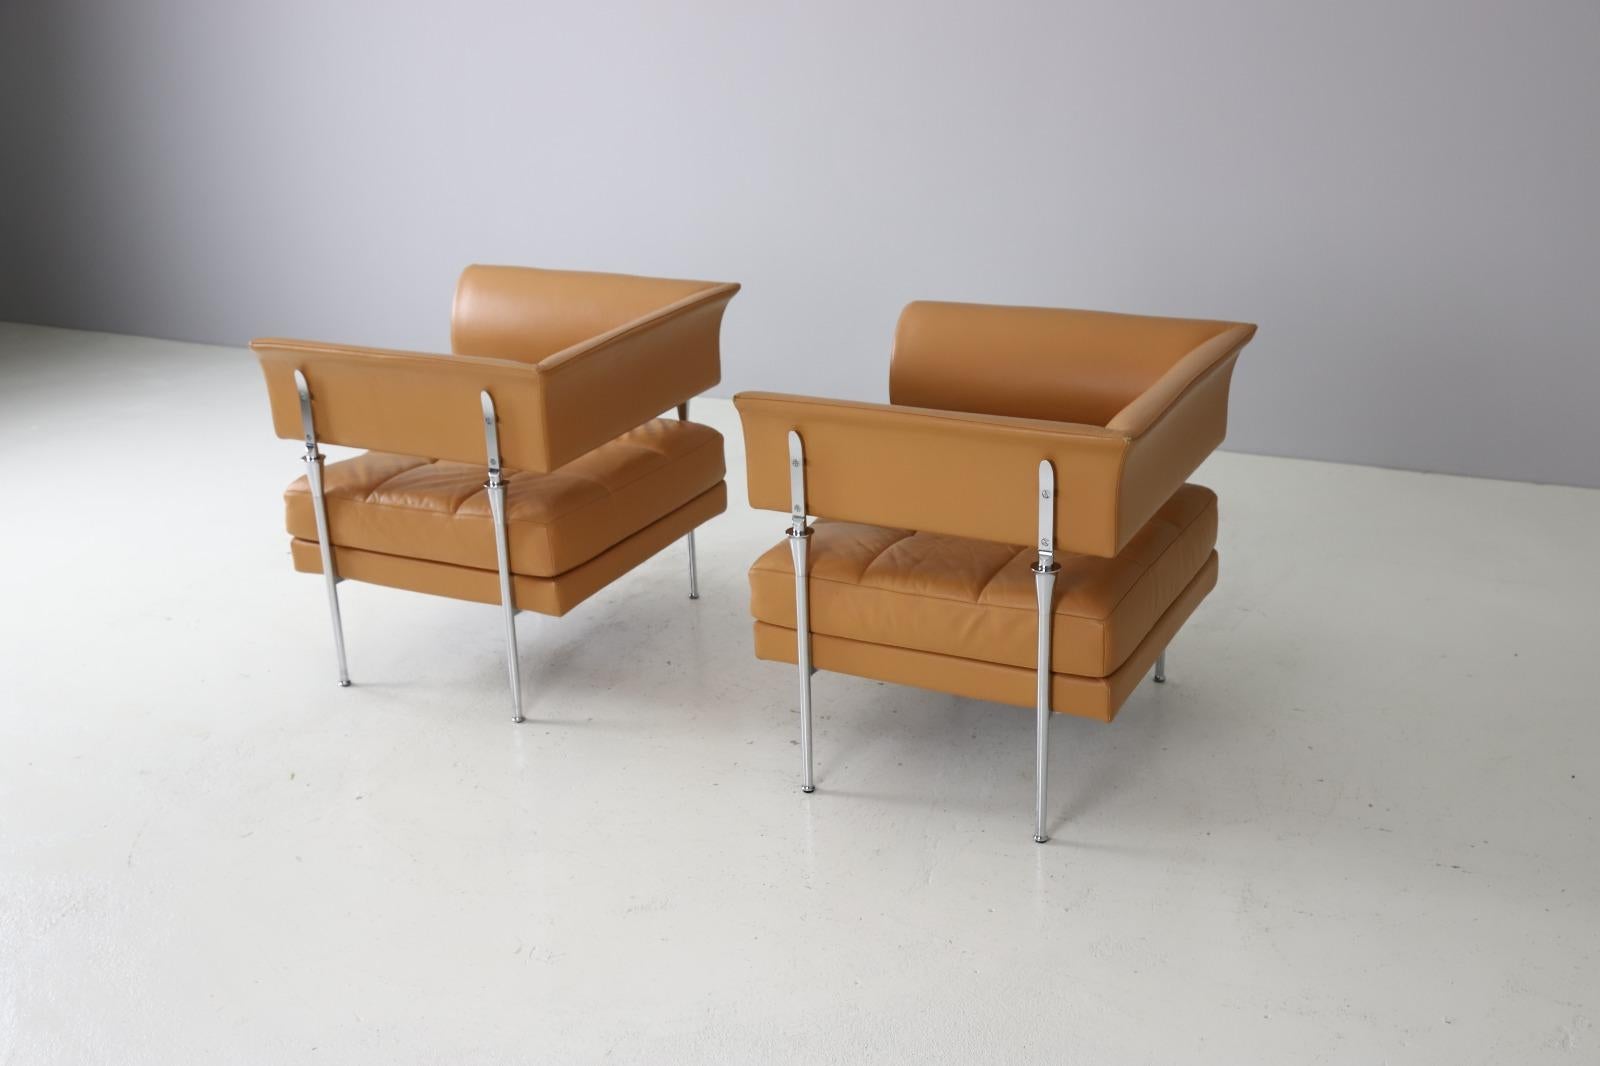 Pair of 'Hydra Castor' Lounge Chairs by Luca Scacchetti for Poltrona Frau, 1990s For Sale 1